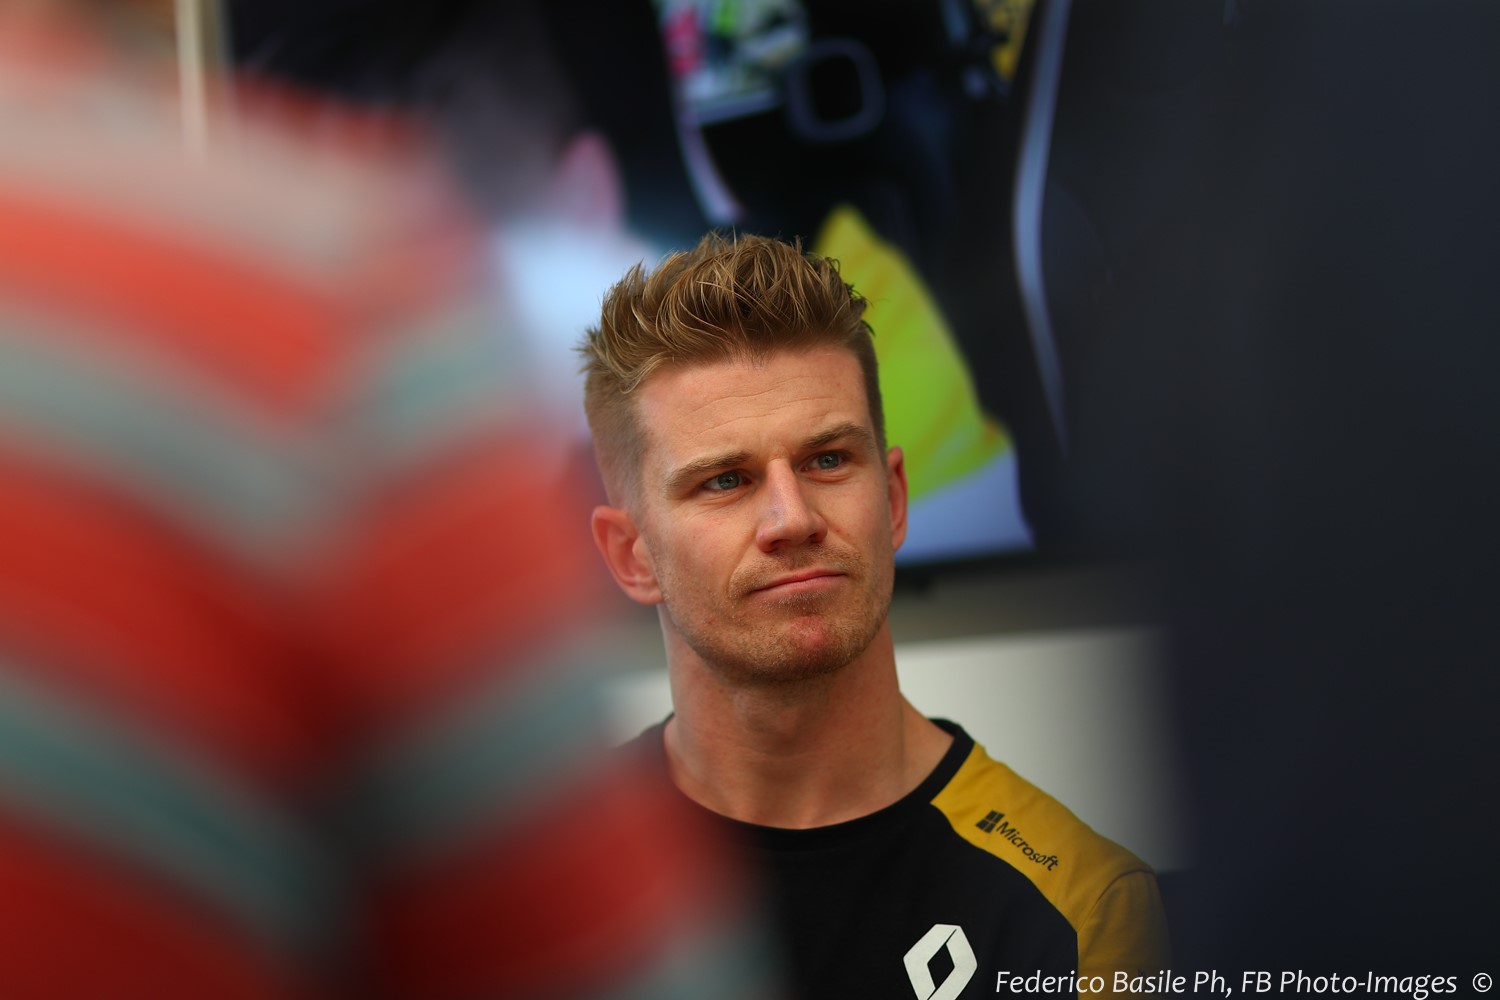 Nico Hulkenberg - so many years in F1 and not even one podium finish